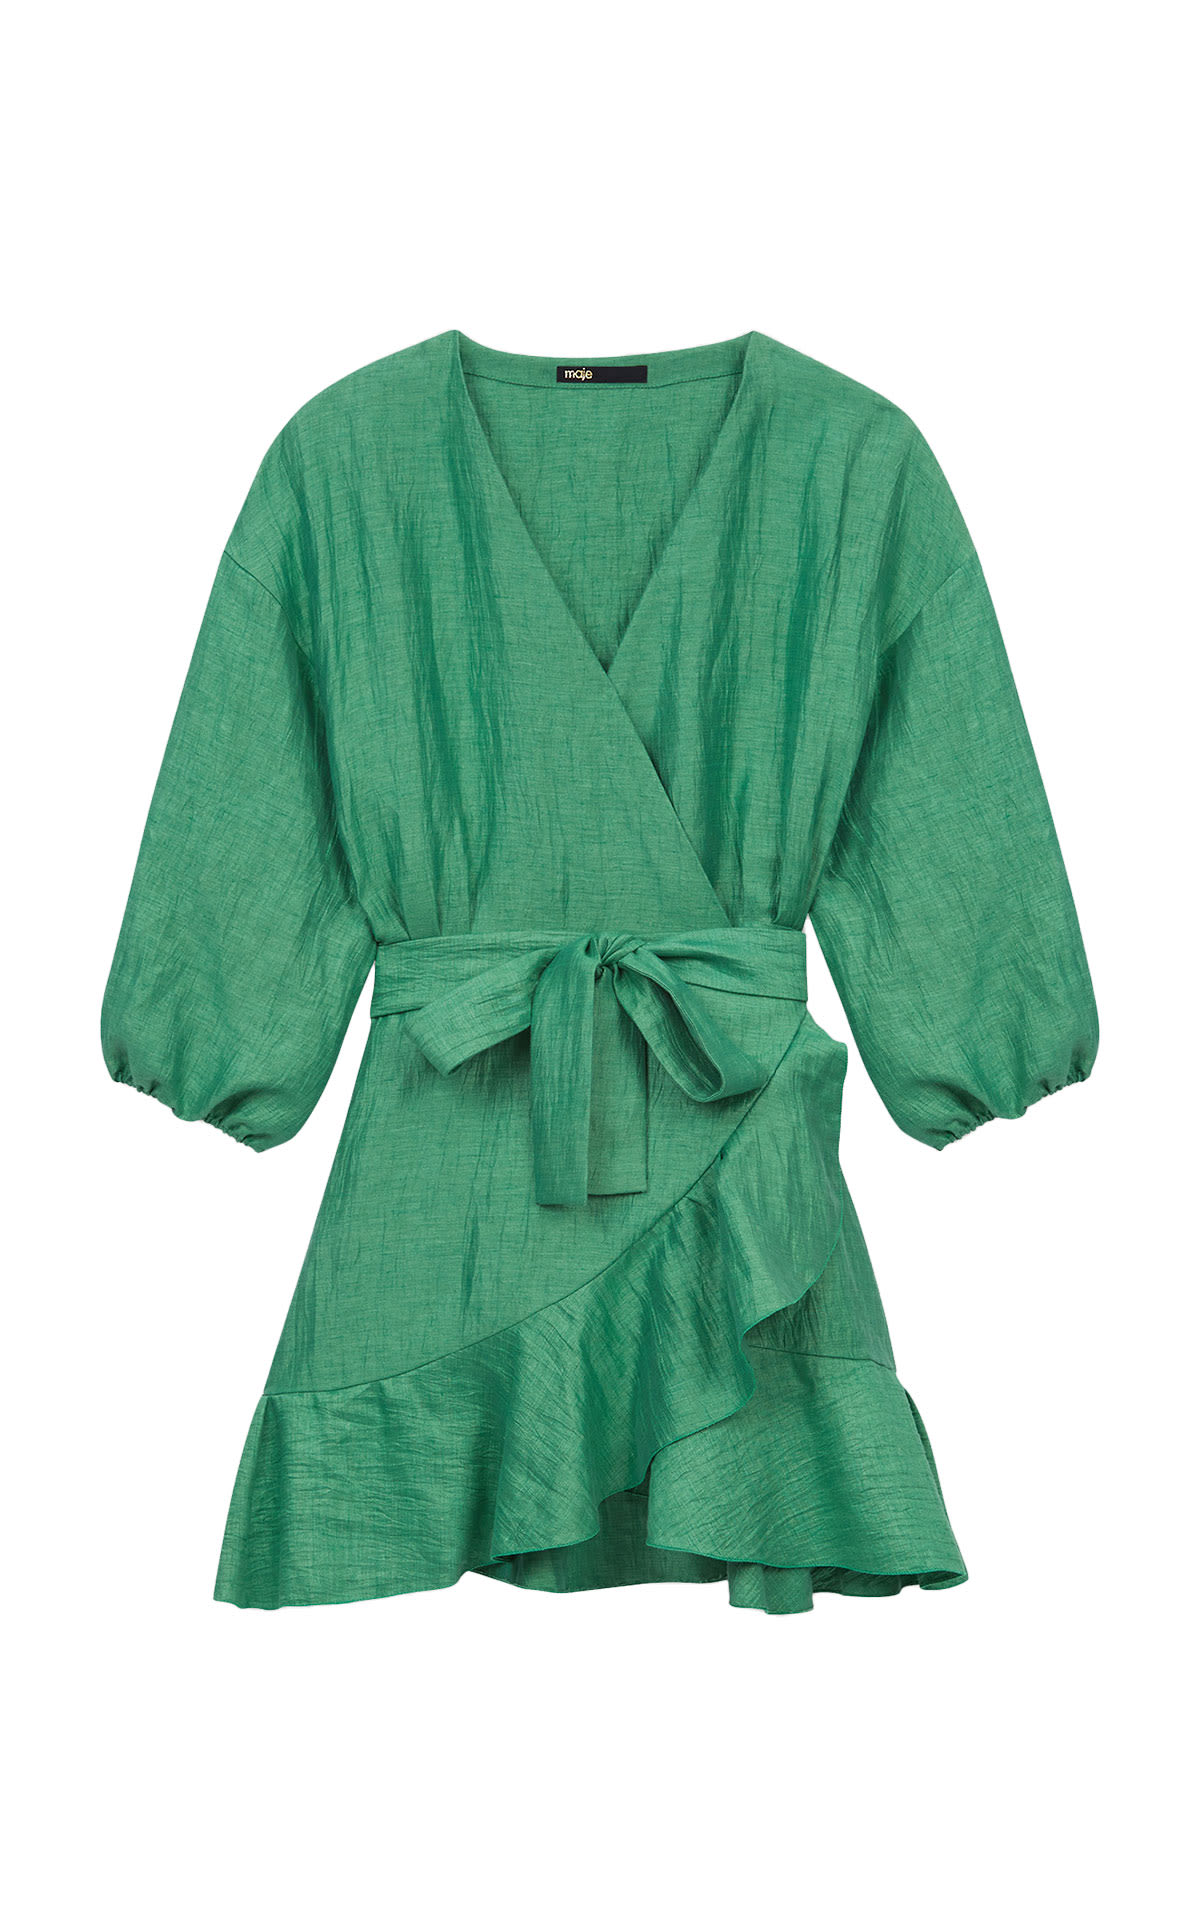 Green dress with bow at the waist Maje